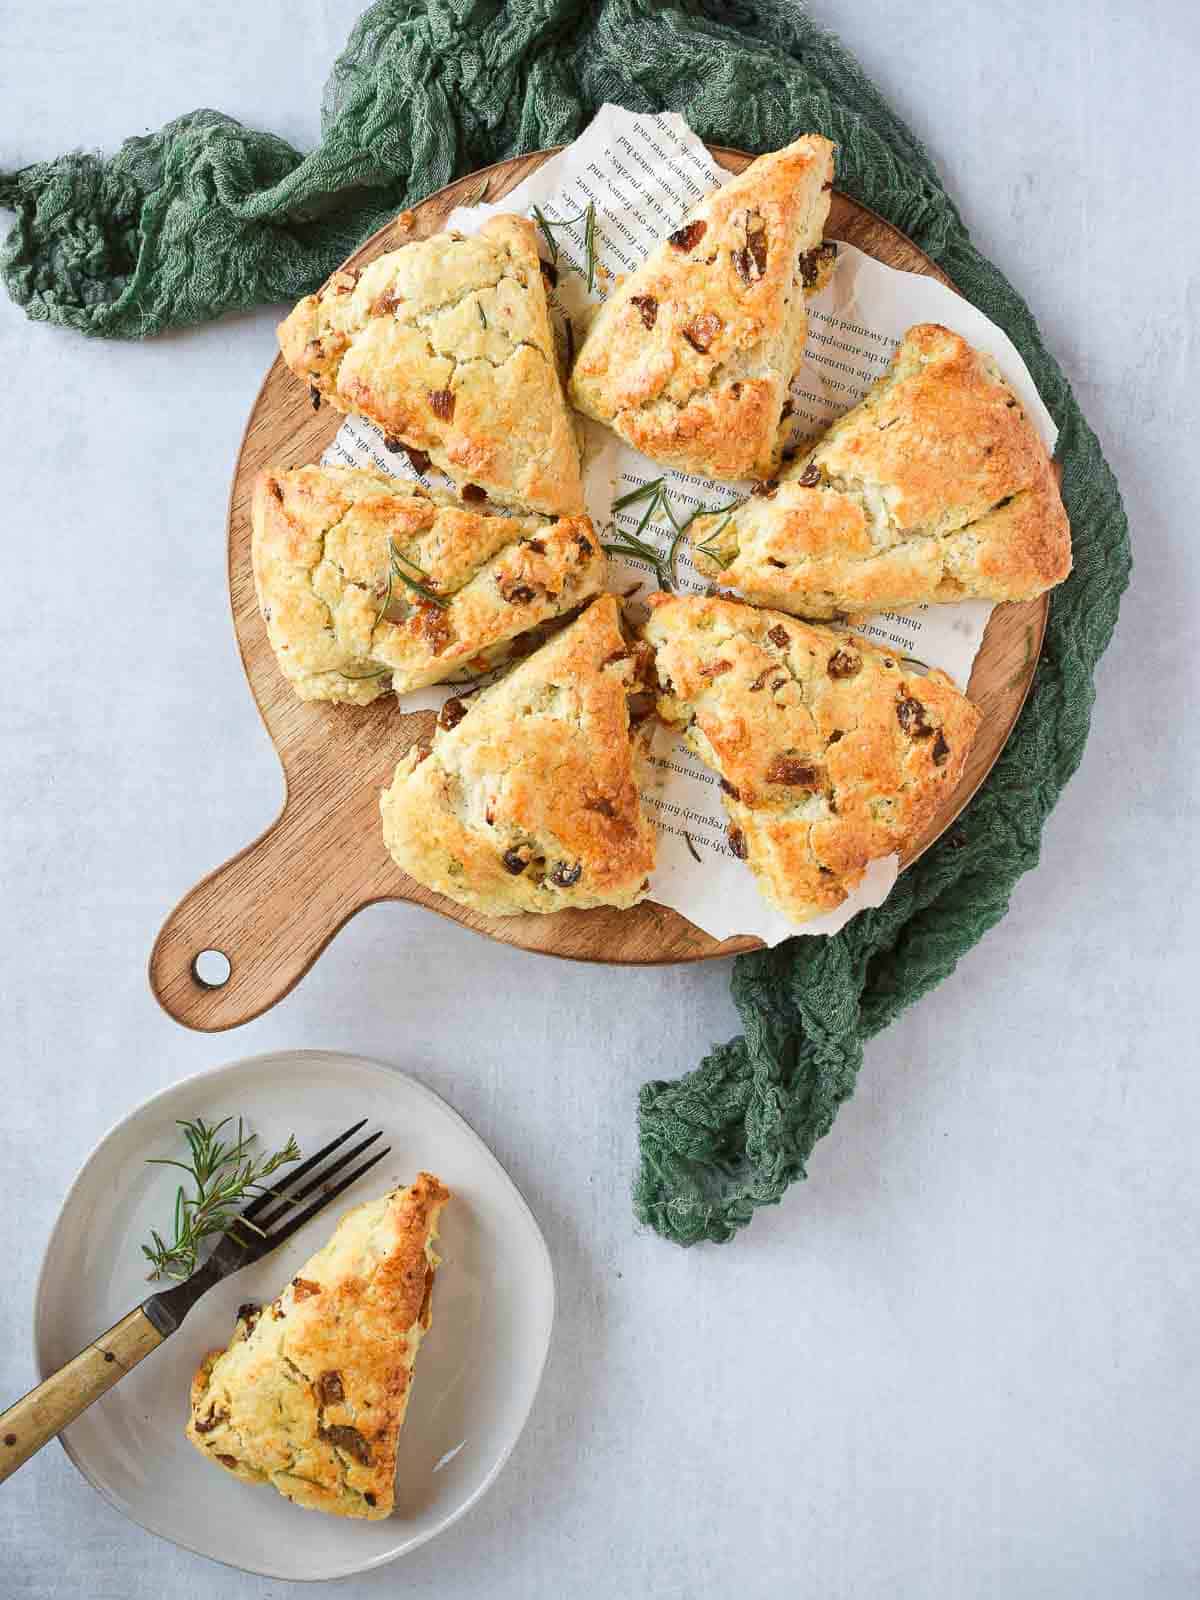 Apricot and rosemary scones on a wooden serving platter.